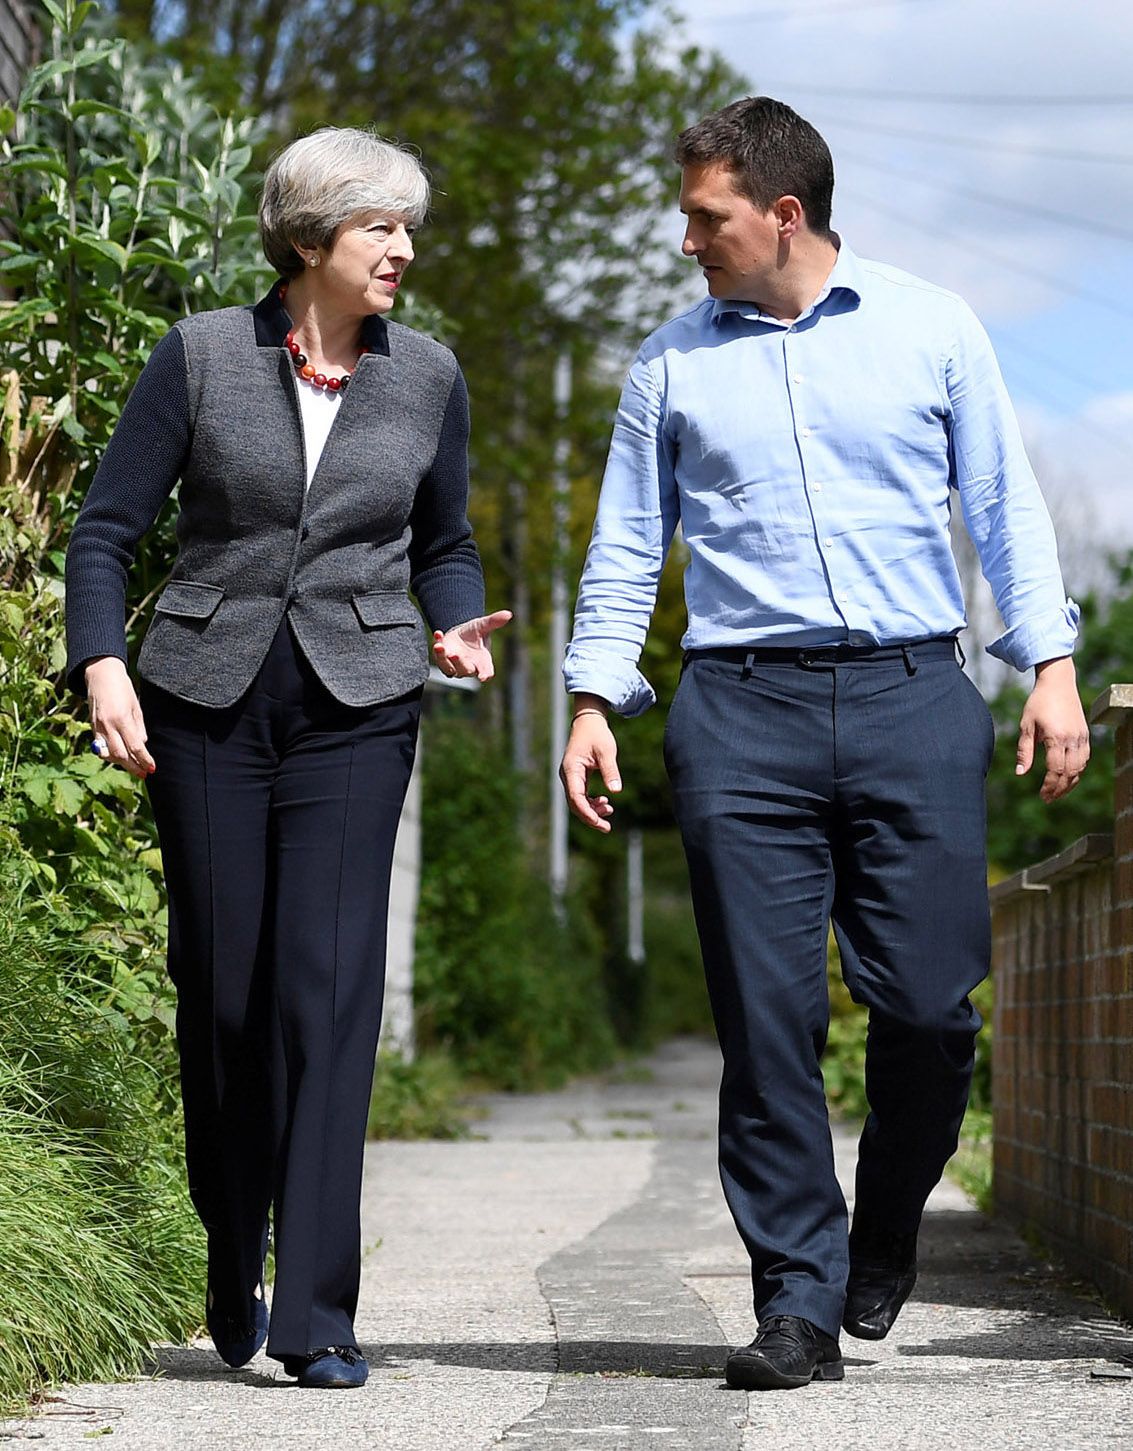 PLYMOUTH, UNITED KINGDOM - MAY 2: Britain's Prime Minister Theresa May walks with local Conservative Party candidate Johnny Mercer during a campaign visit on May 2, 2017 in Plymouth, England. The Prime Minister is campaigning in South-West England, a former Liberal Democrat stronghold, as she urges West Country voters to stick with her party ahead of the polls on June 8. (Photo by Dylan Martinez/WPA Pool/Getty Images)